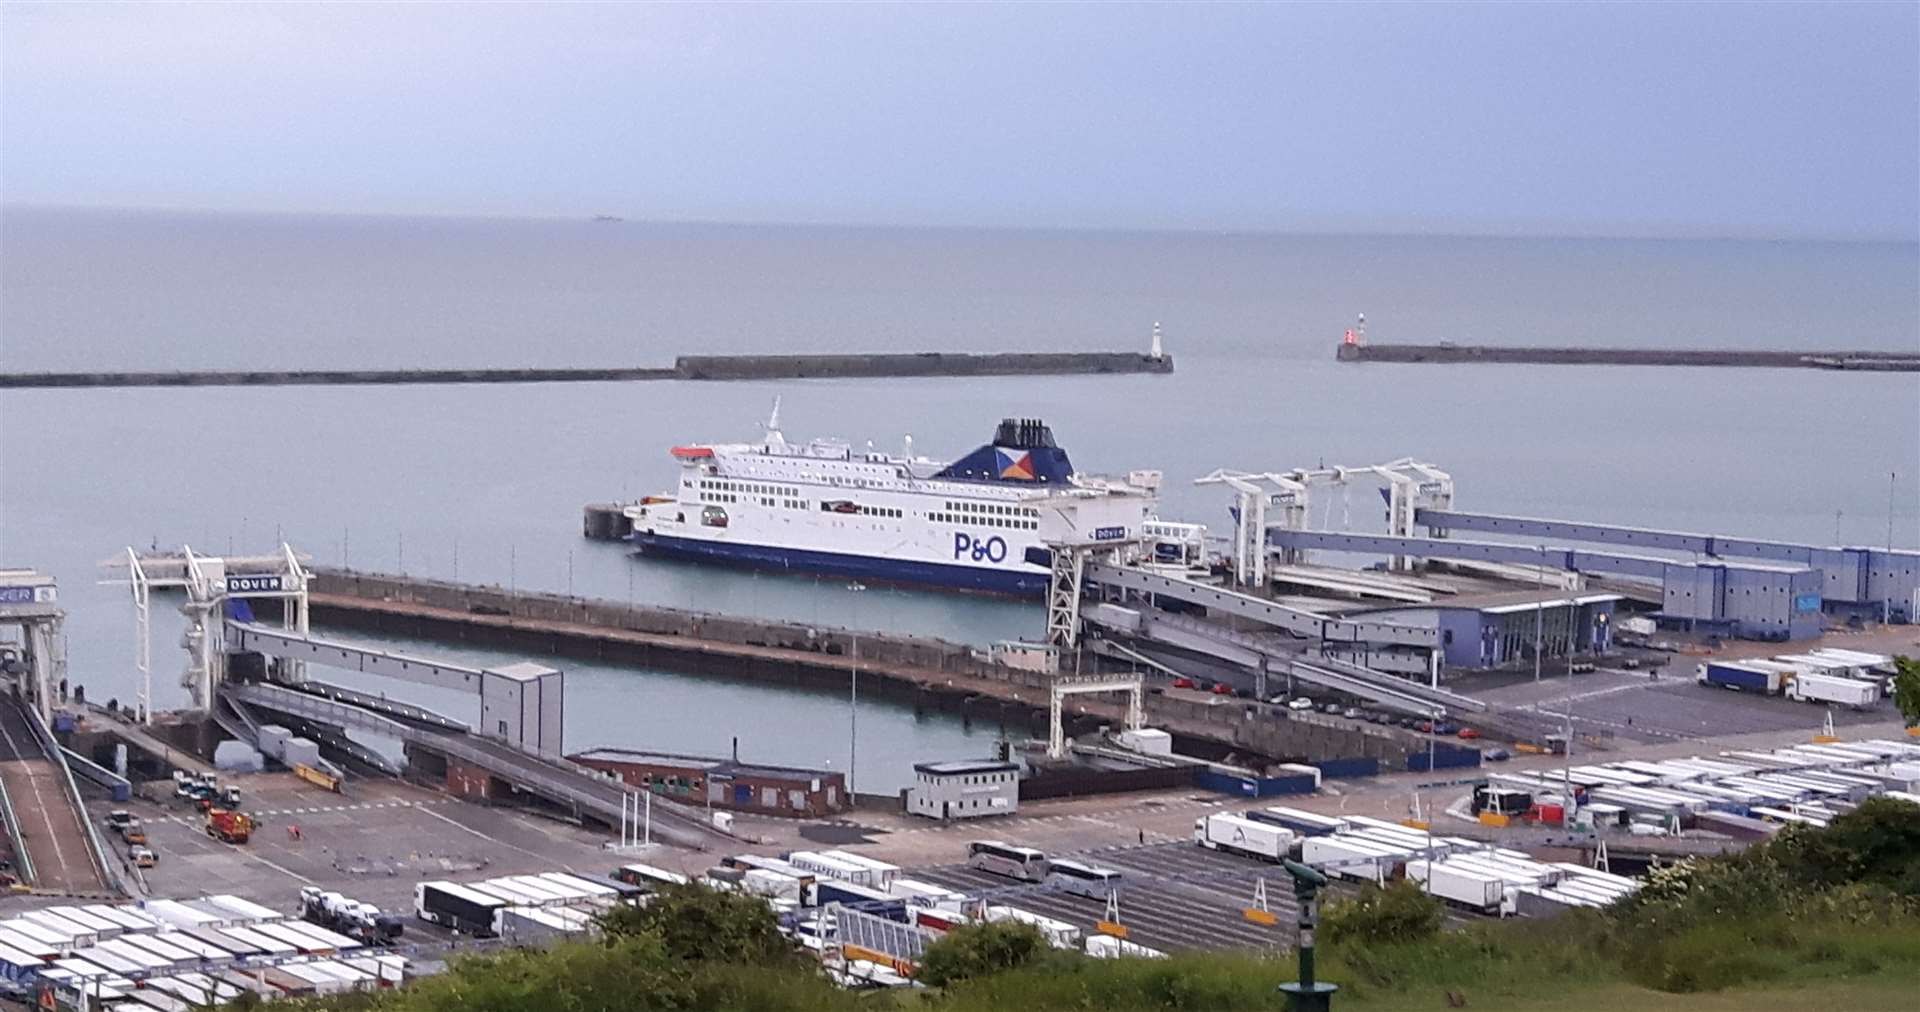 Thousands of passengers are expected to travel to Europe through Dover